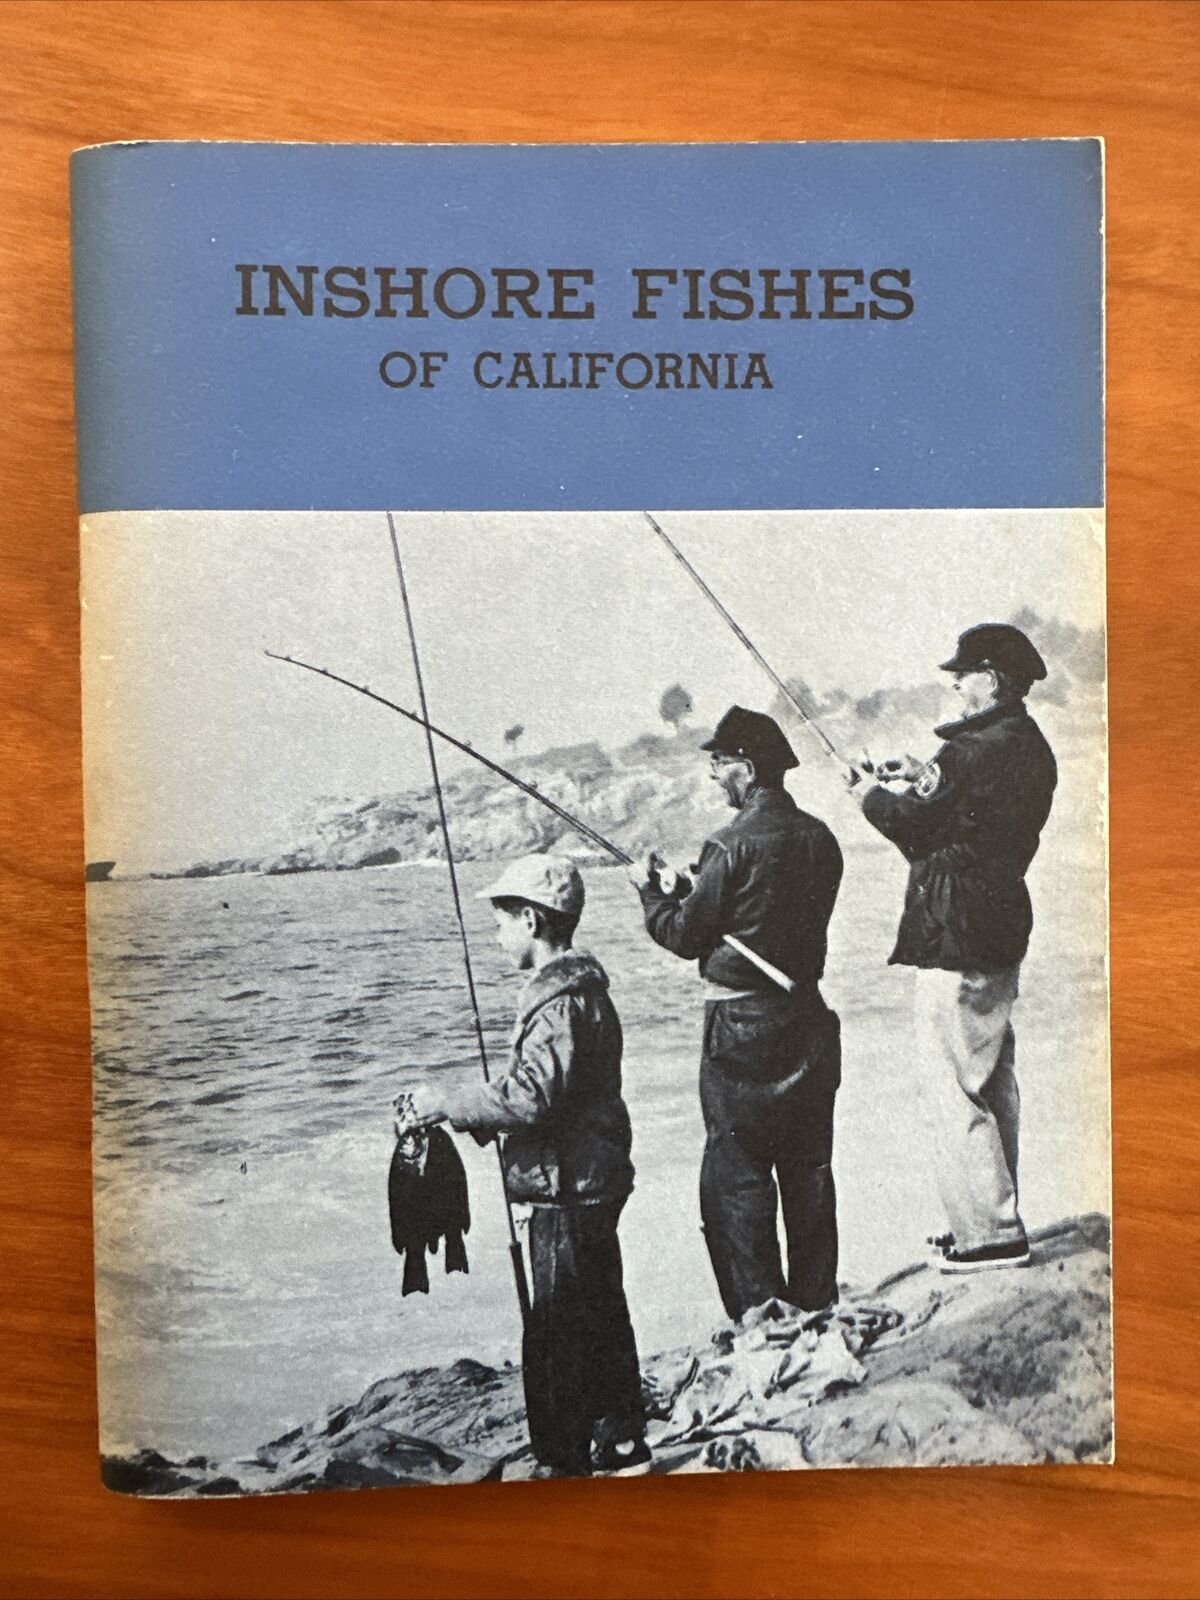 1966 INSHORE FISHES OF CALIFORNIA California Department Of Fish & Game VINTAGE